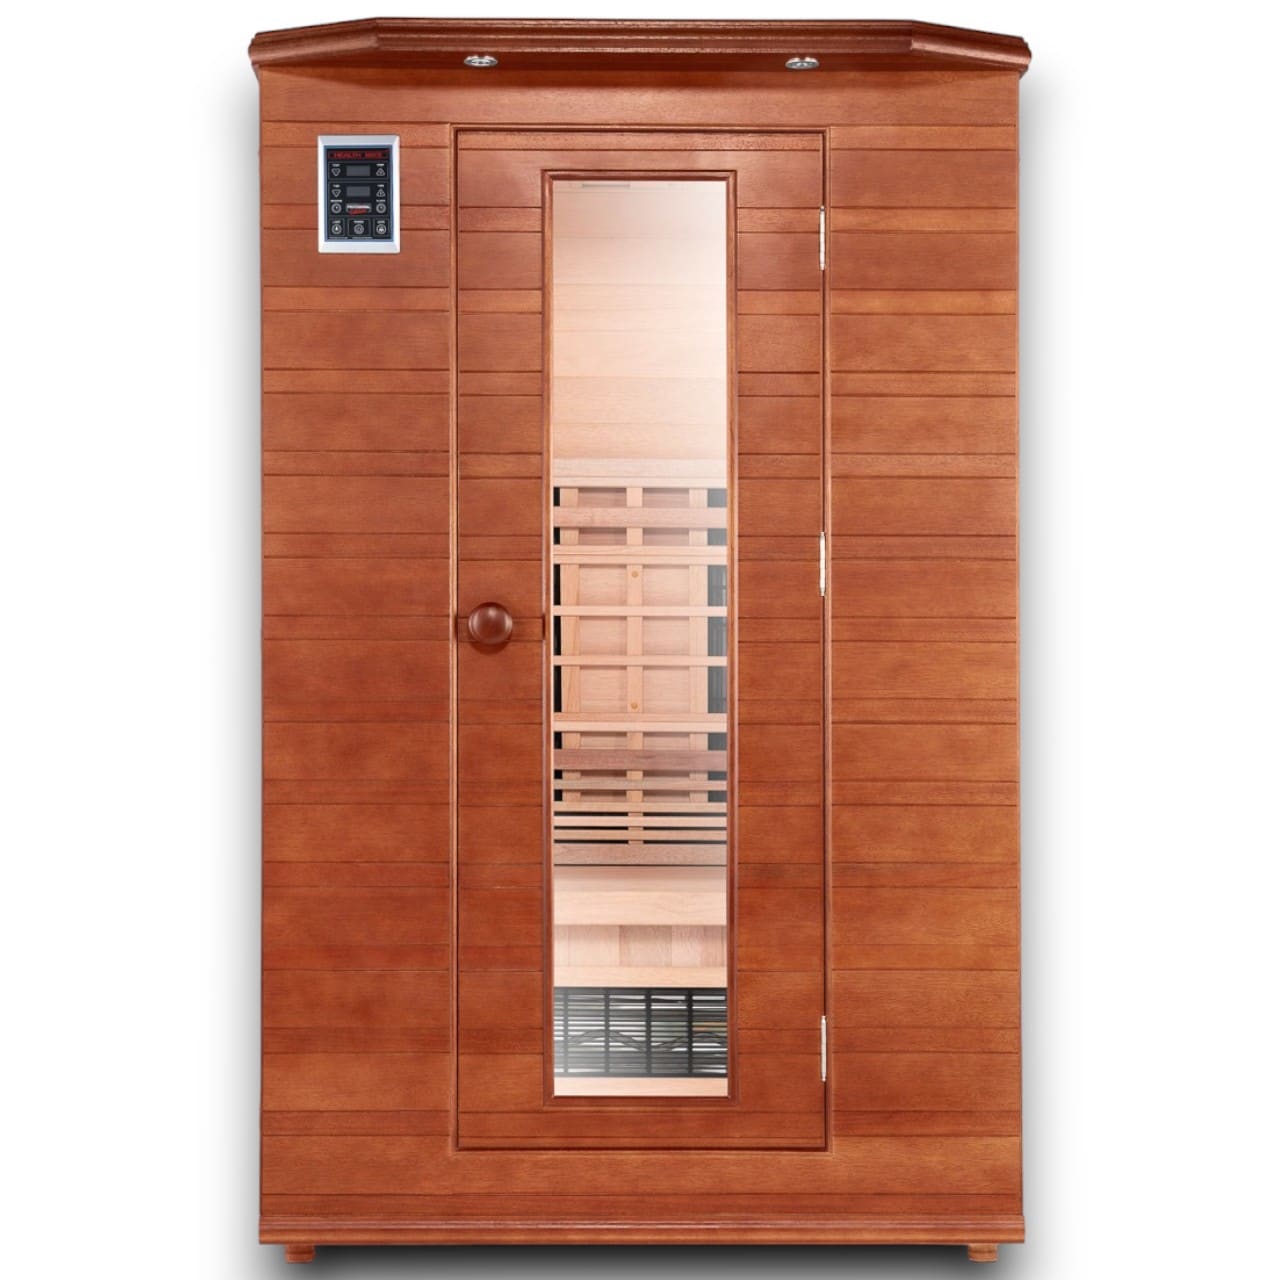 Health Mate Enrich 2 Person Infrared Home Sauna - Heracles Wellness